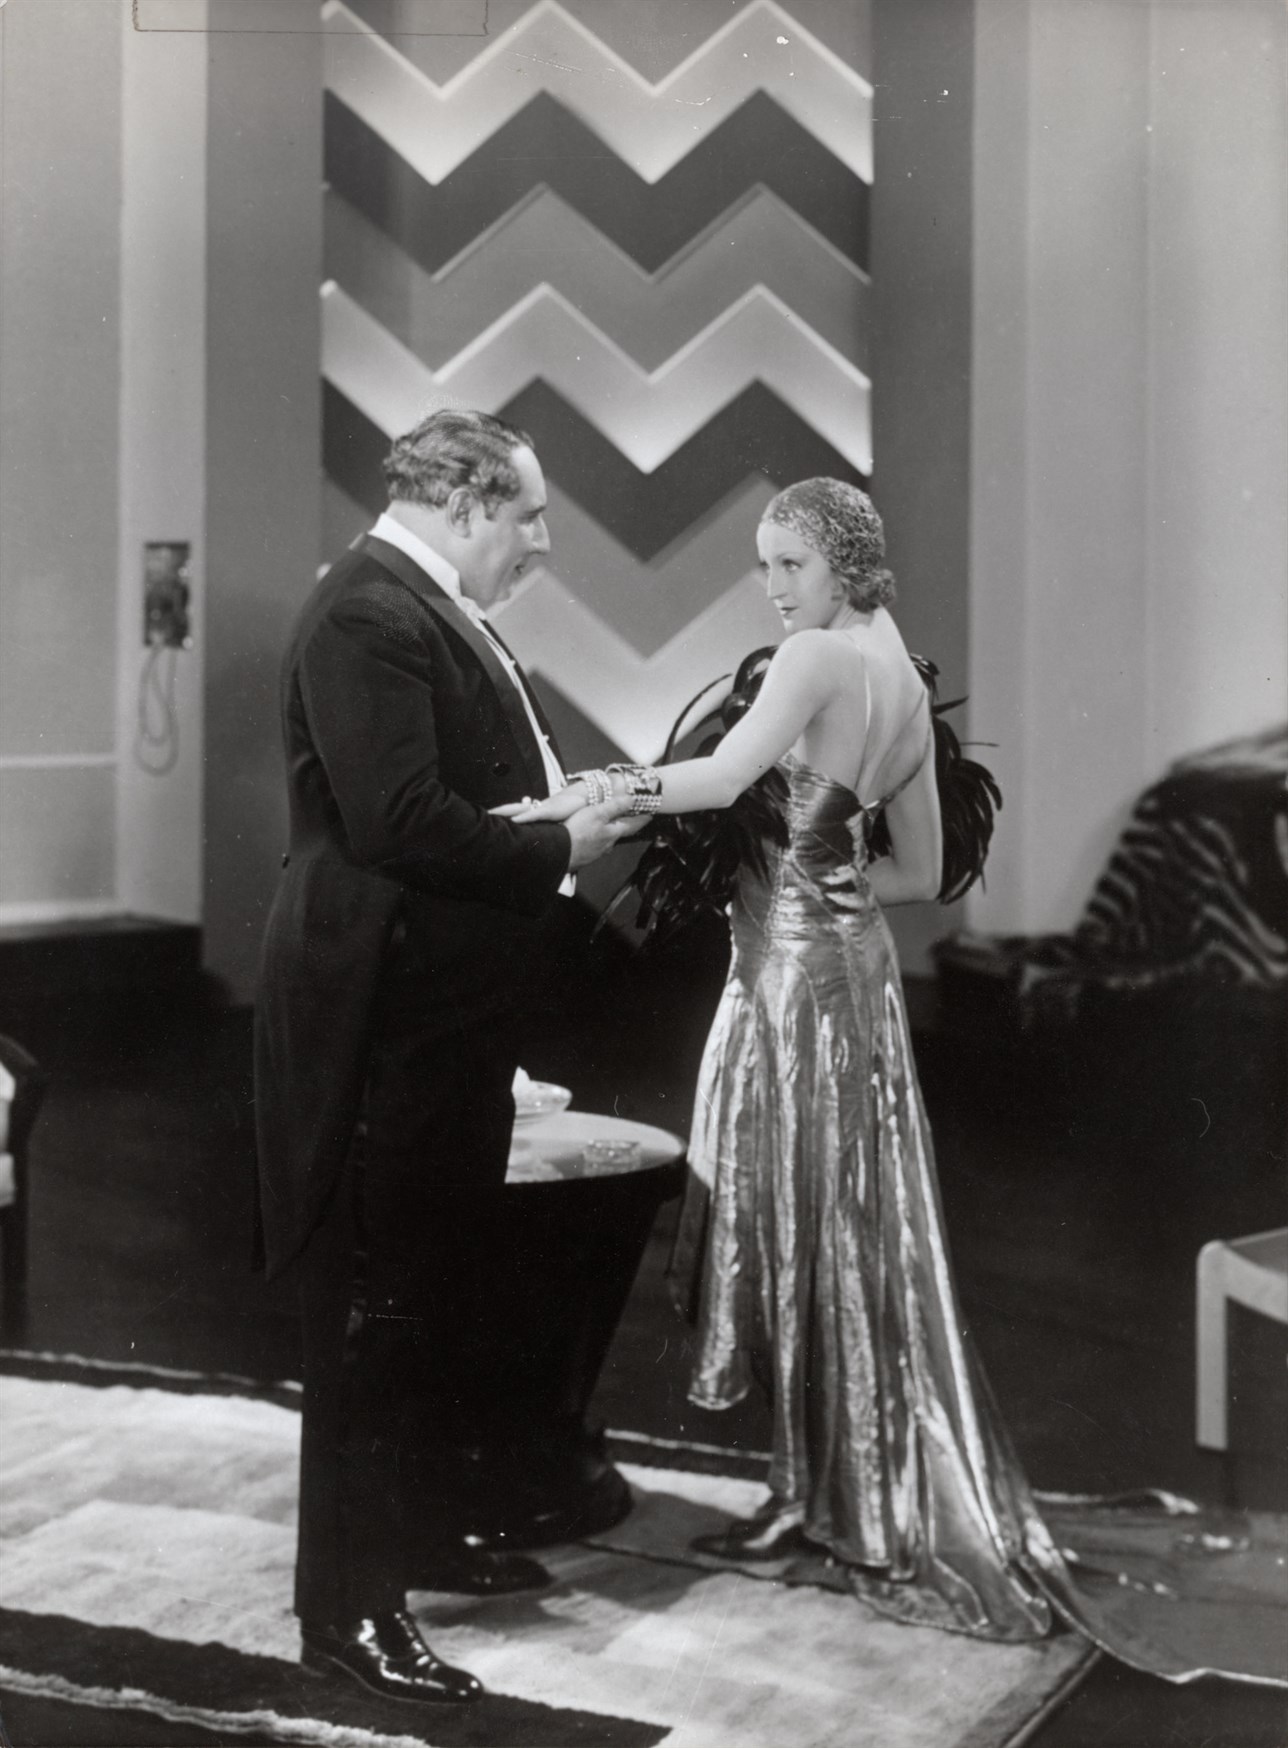 Still of Pierre Alcover and Brigitte Helm in L'argent (1928)